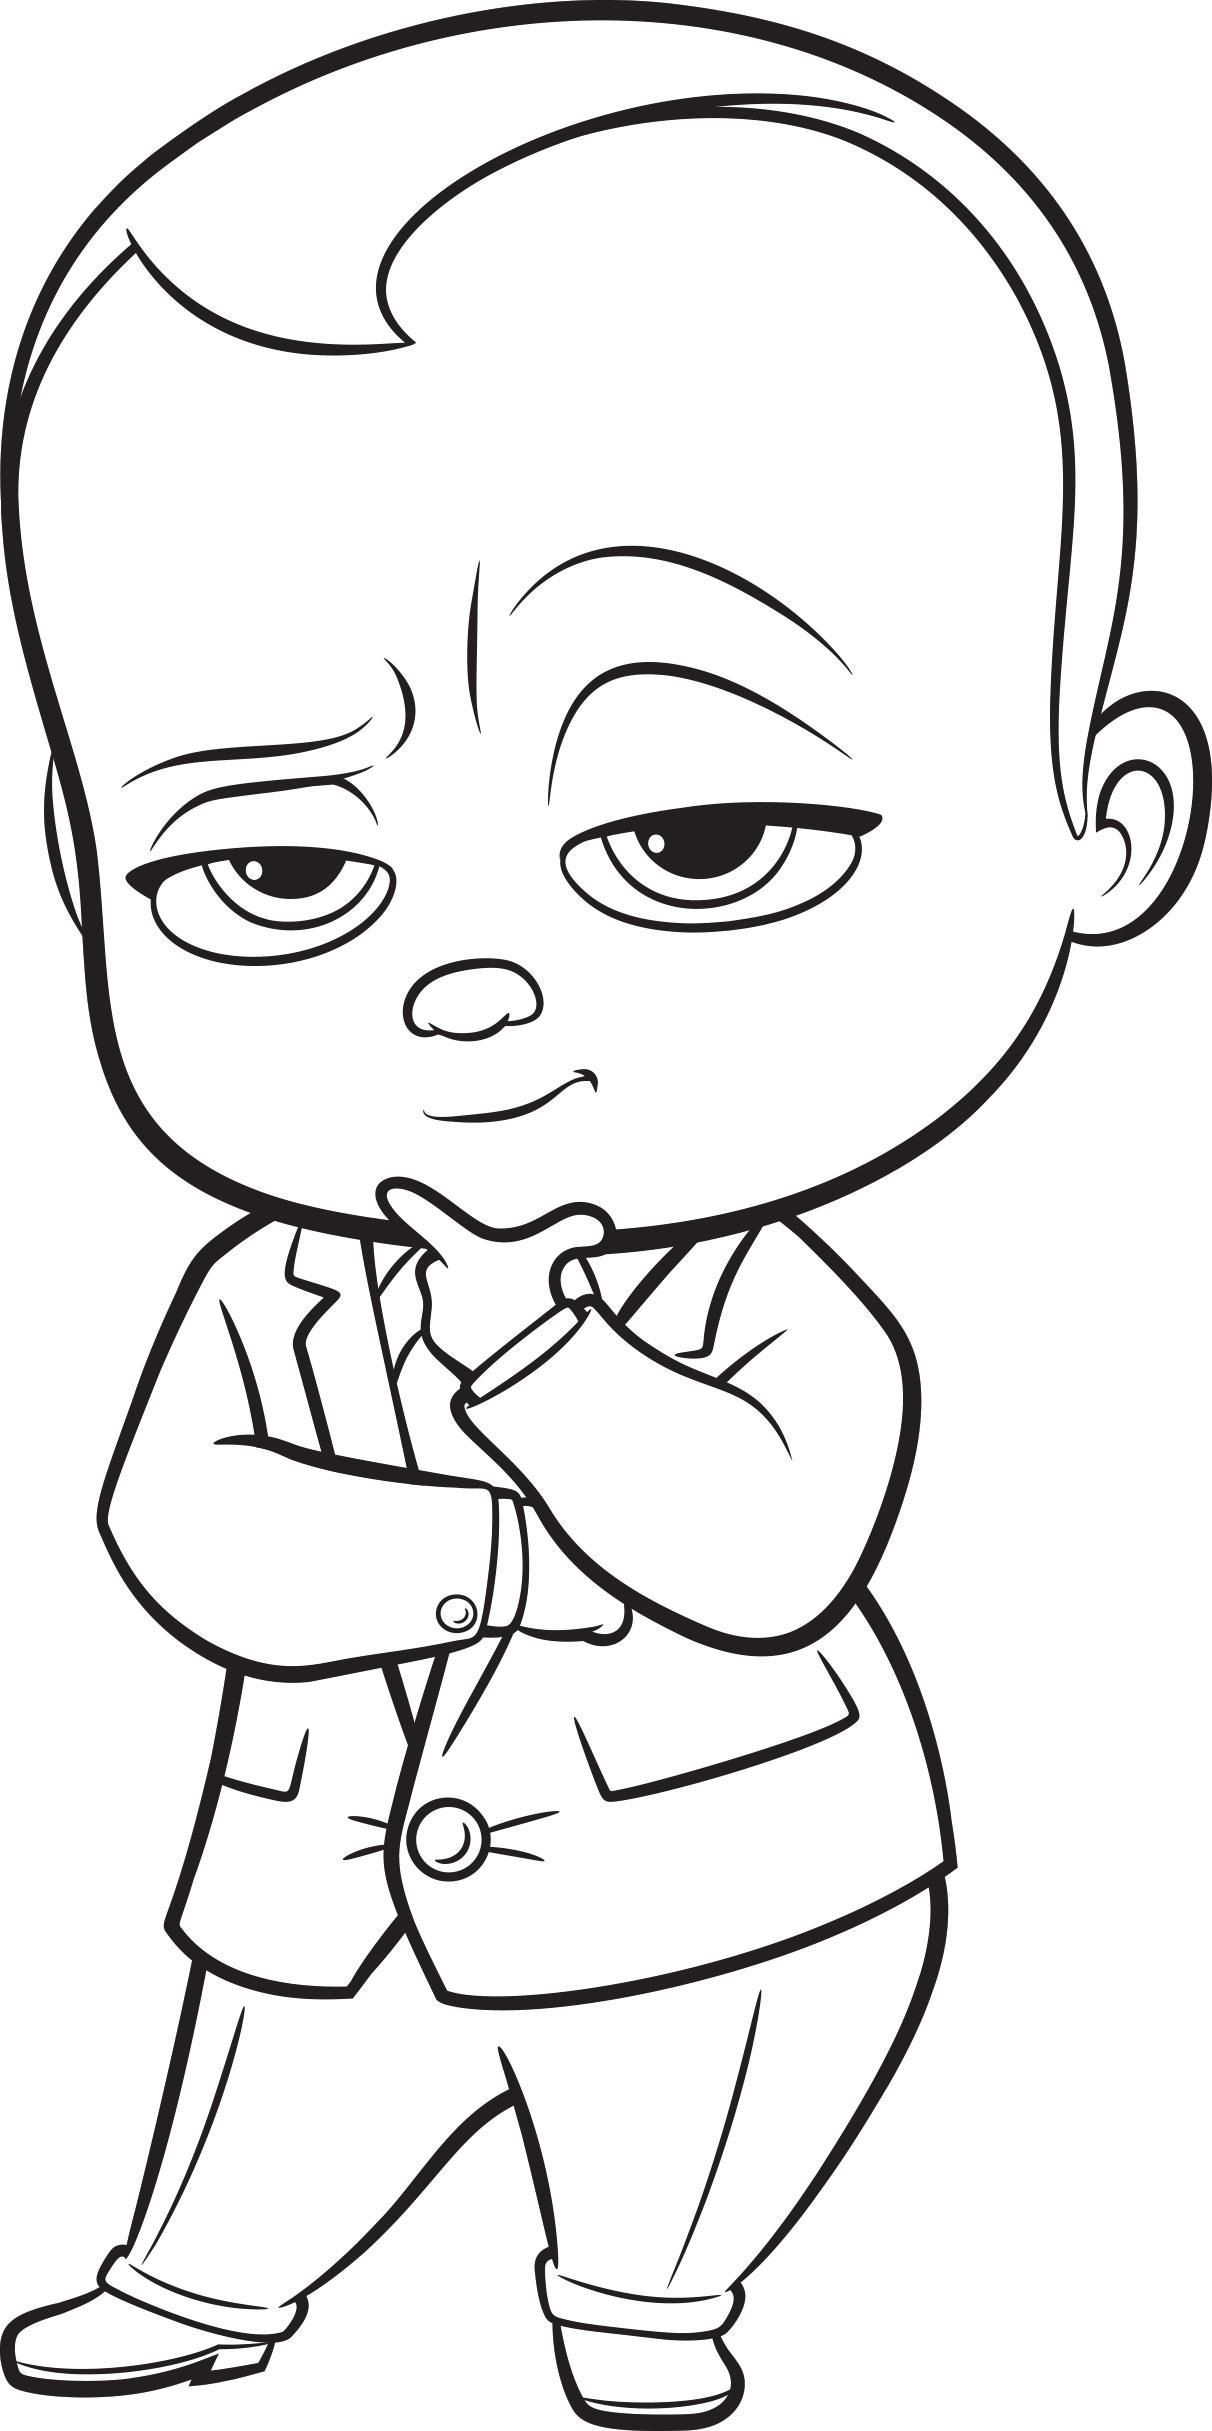 Baby Coloring Sheet
 Boss Baby Coloring Pages Best Coloring Pages For Kids